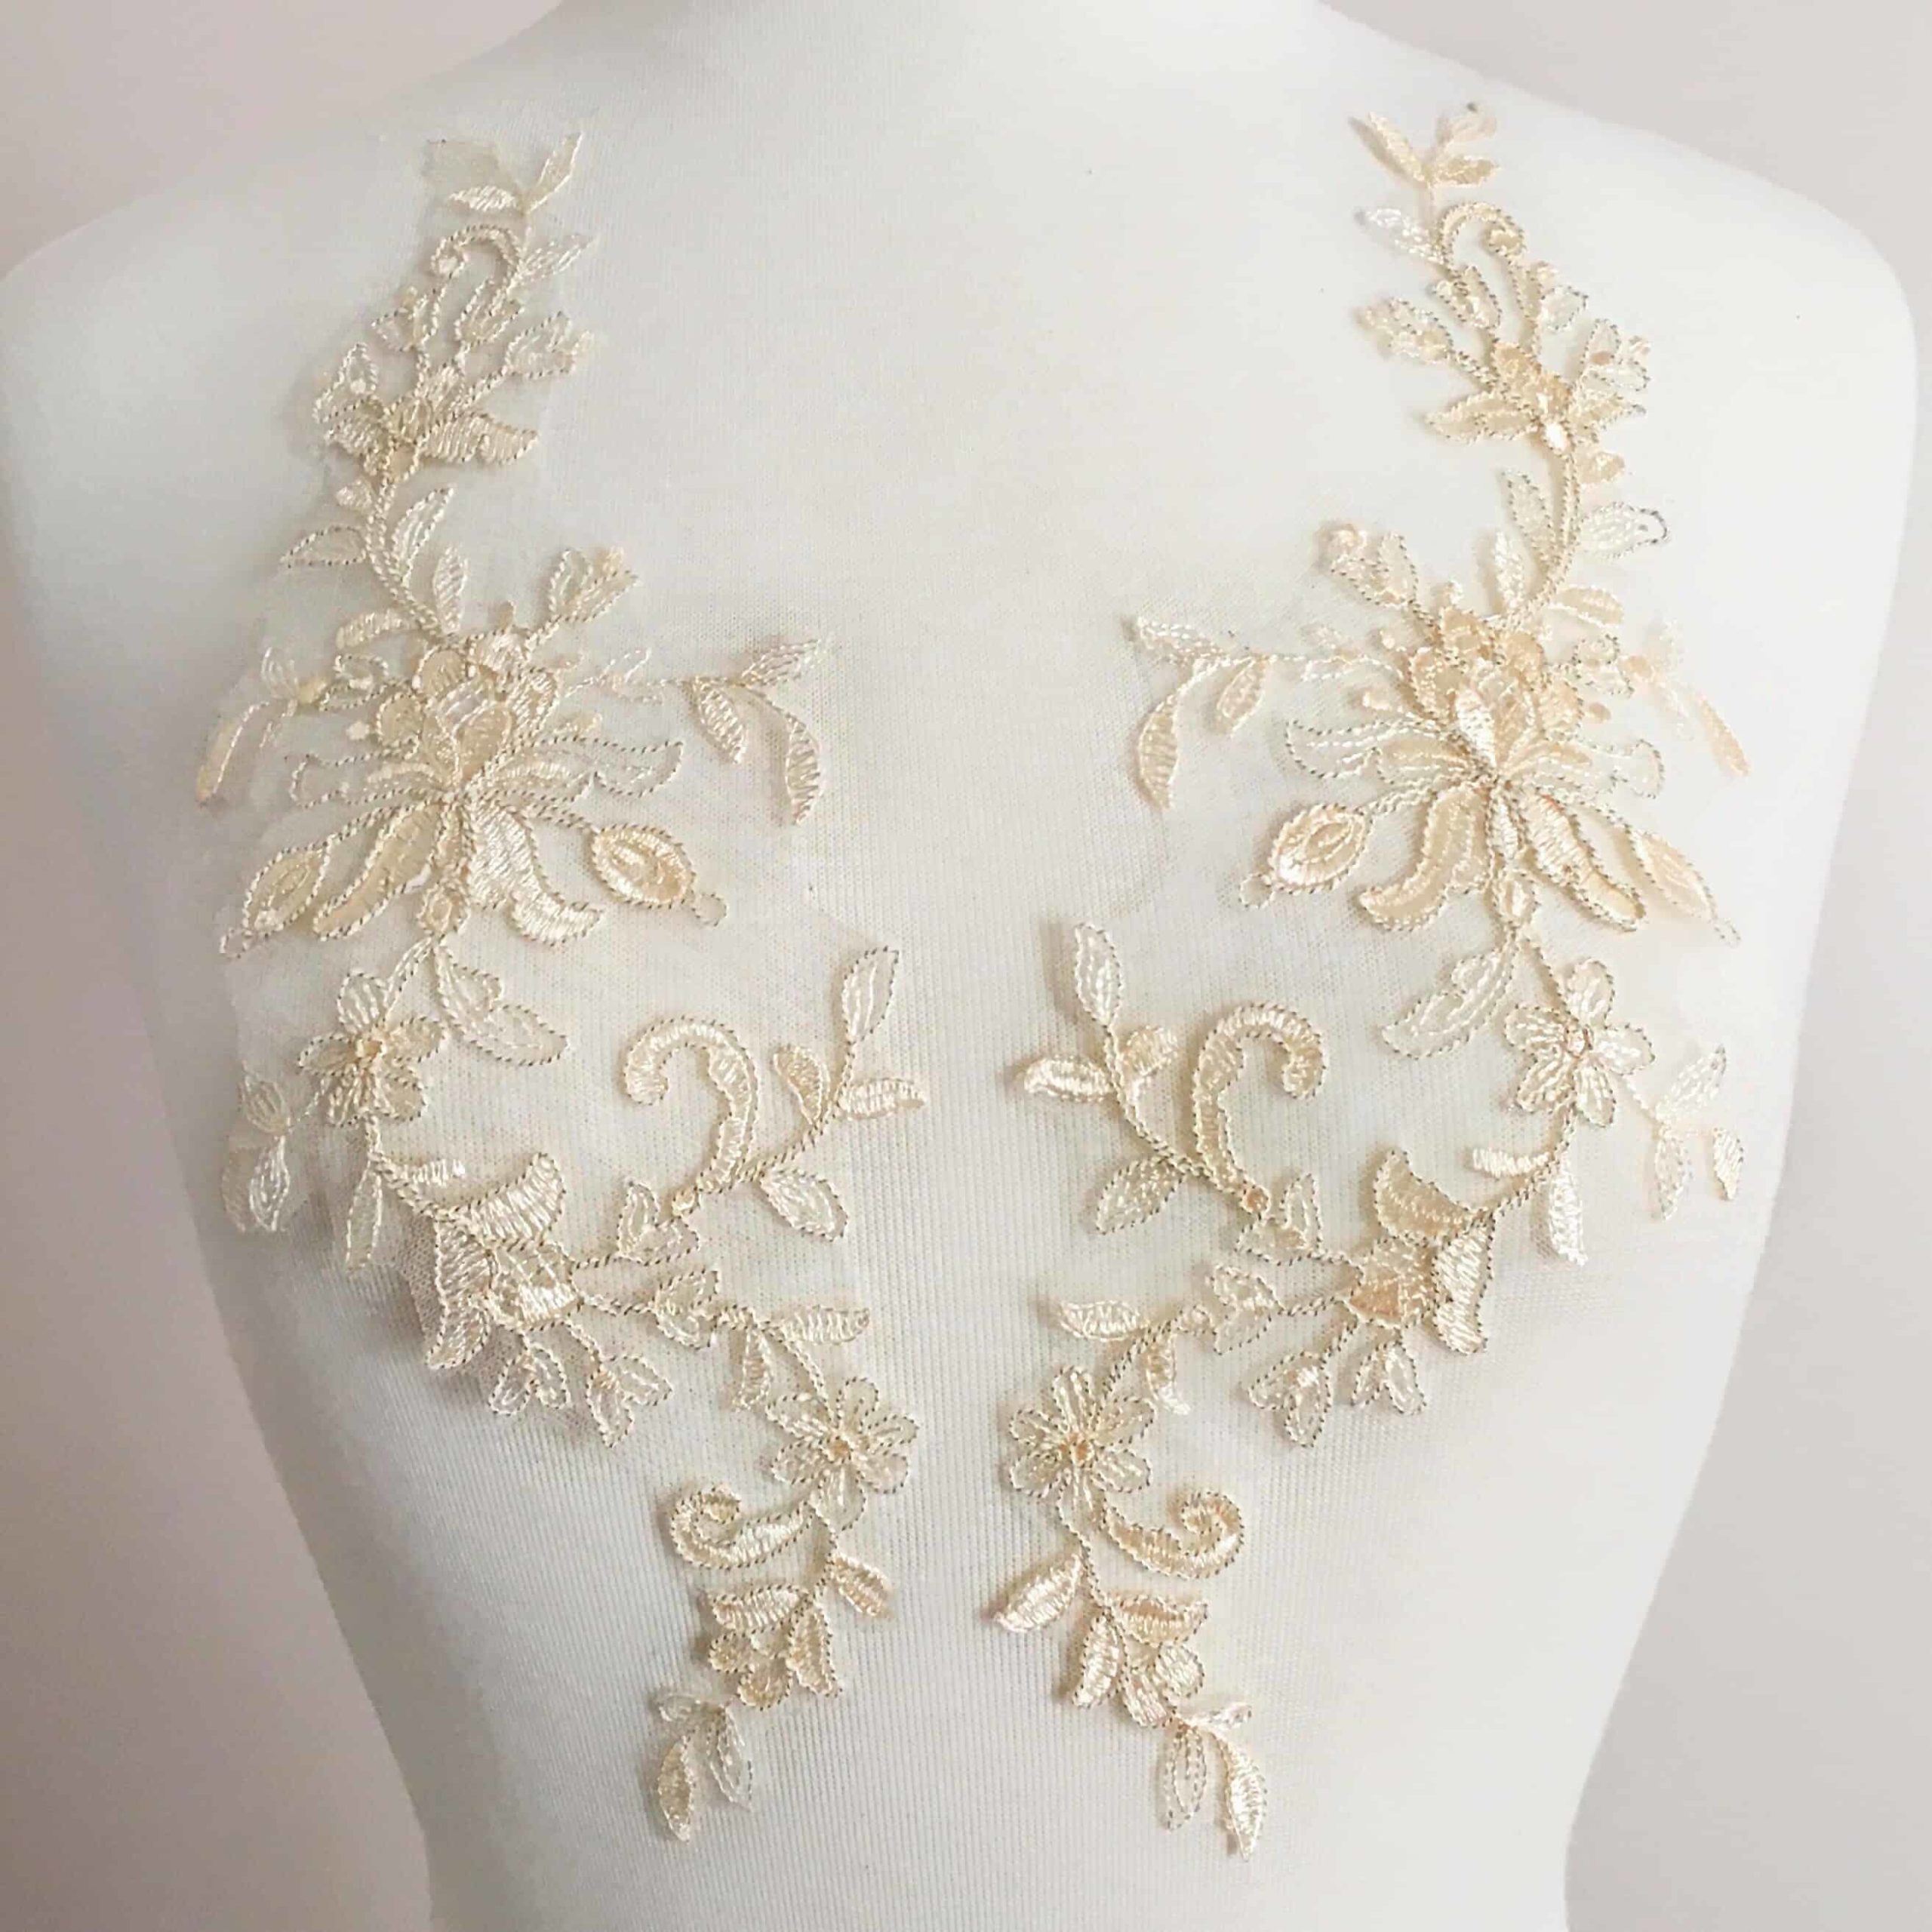 Matching Felicity Embroidered Lace Applique (SOLD AS A PAIR)